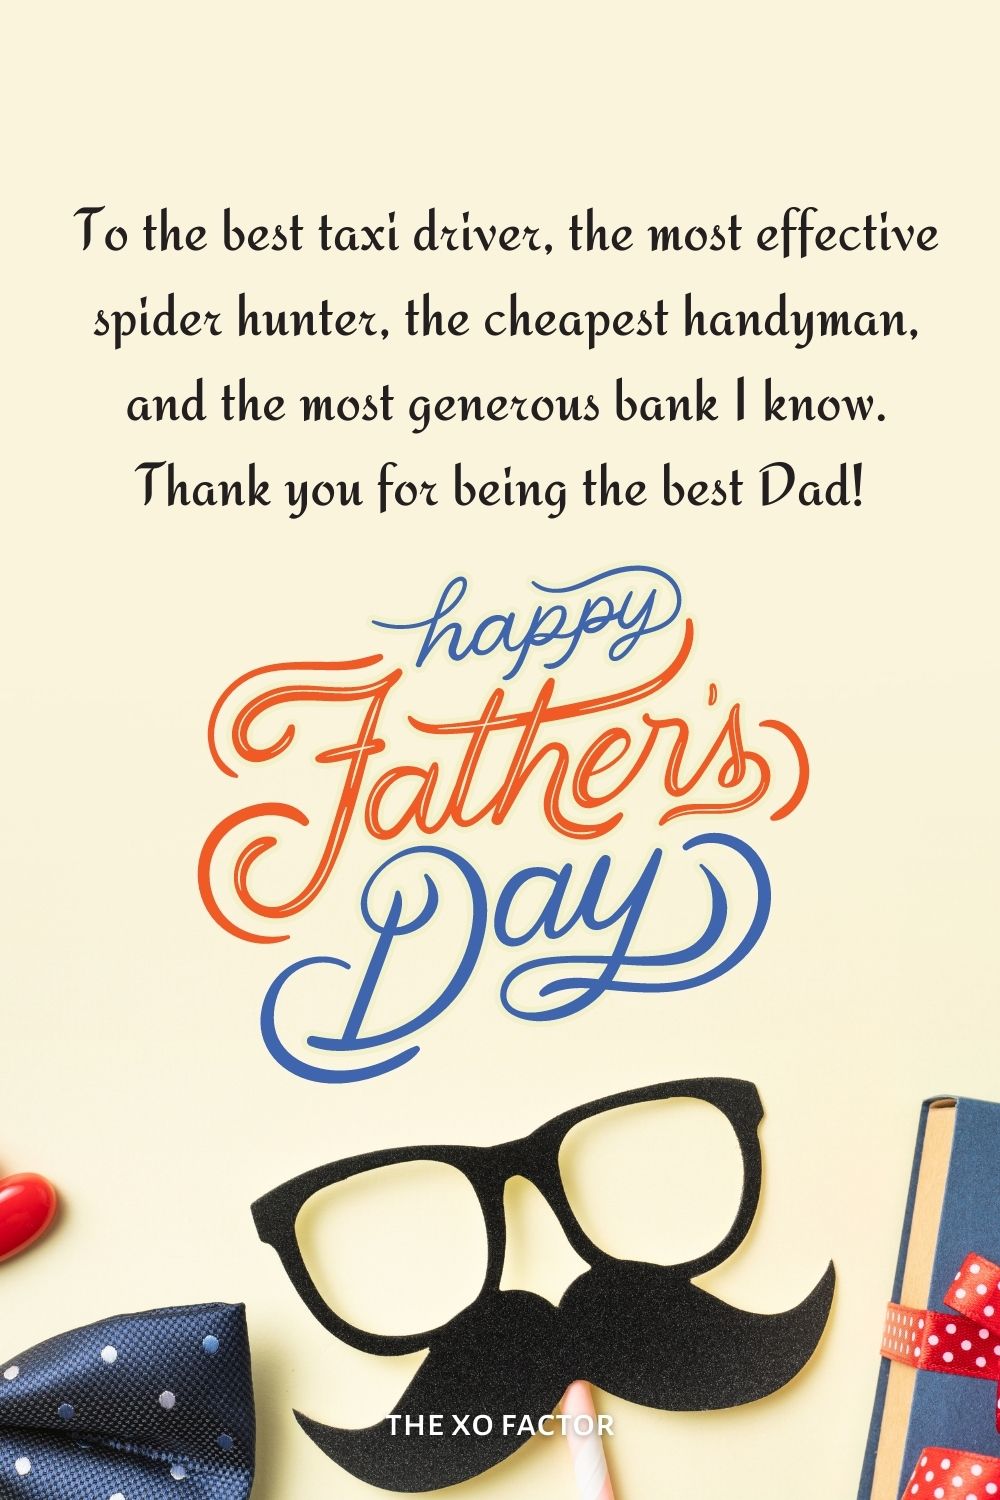 To the best taxi driver, the most effective spider hunter, the cheapest handyman, and the most generous bank I know. Thank you for being the best Dad! Happy Father’s day!